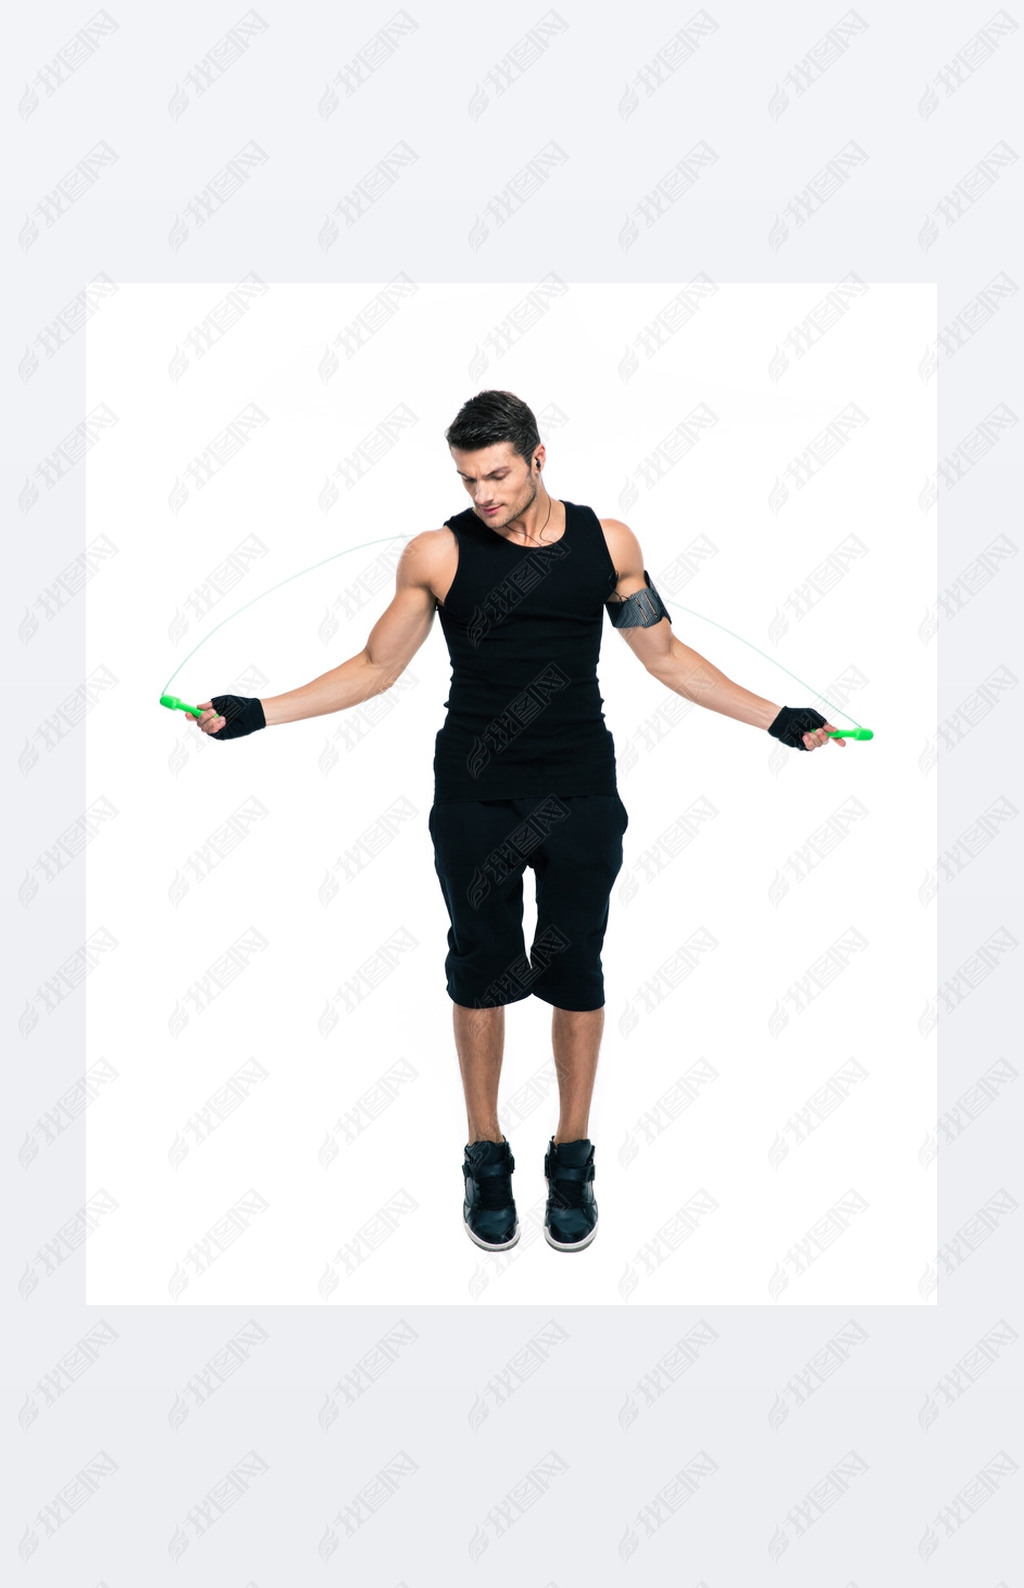 Fitness man jumping with skipping rope